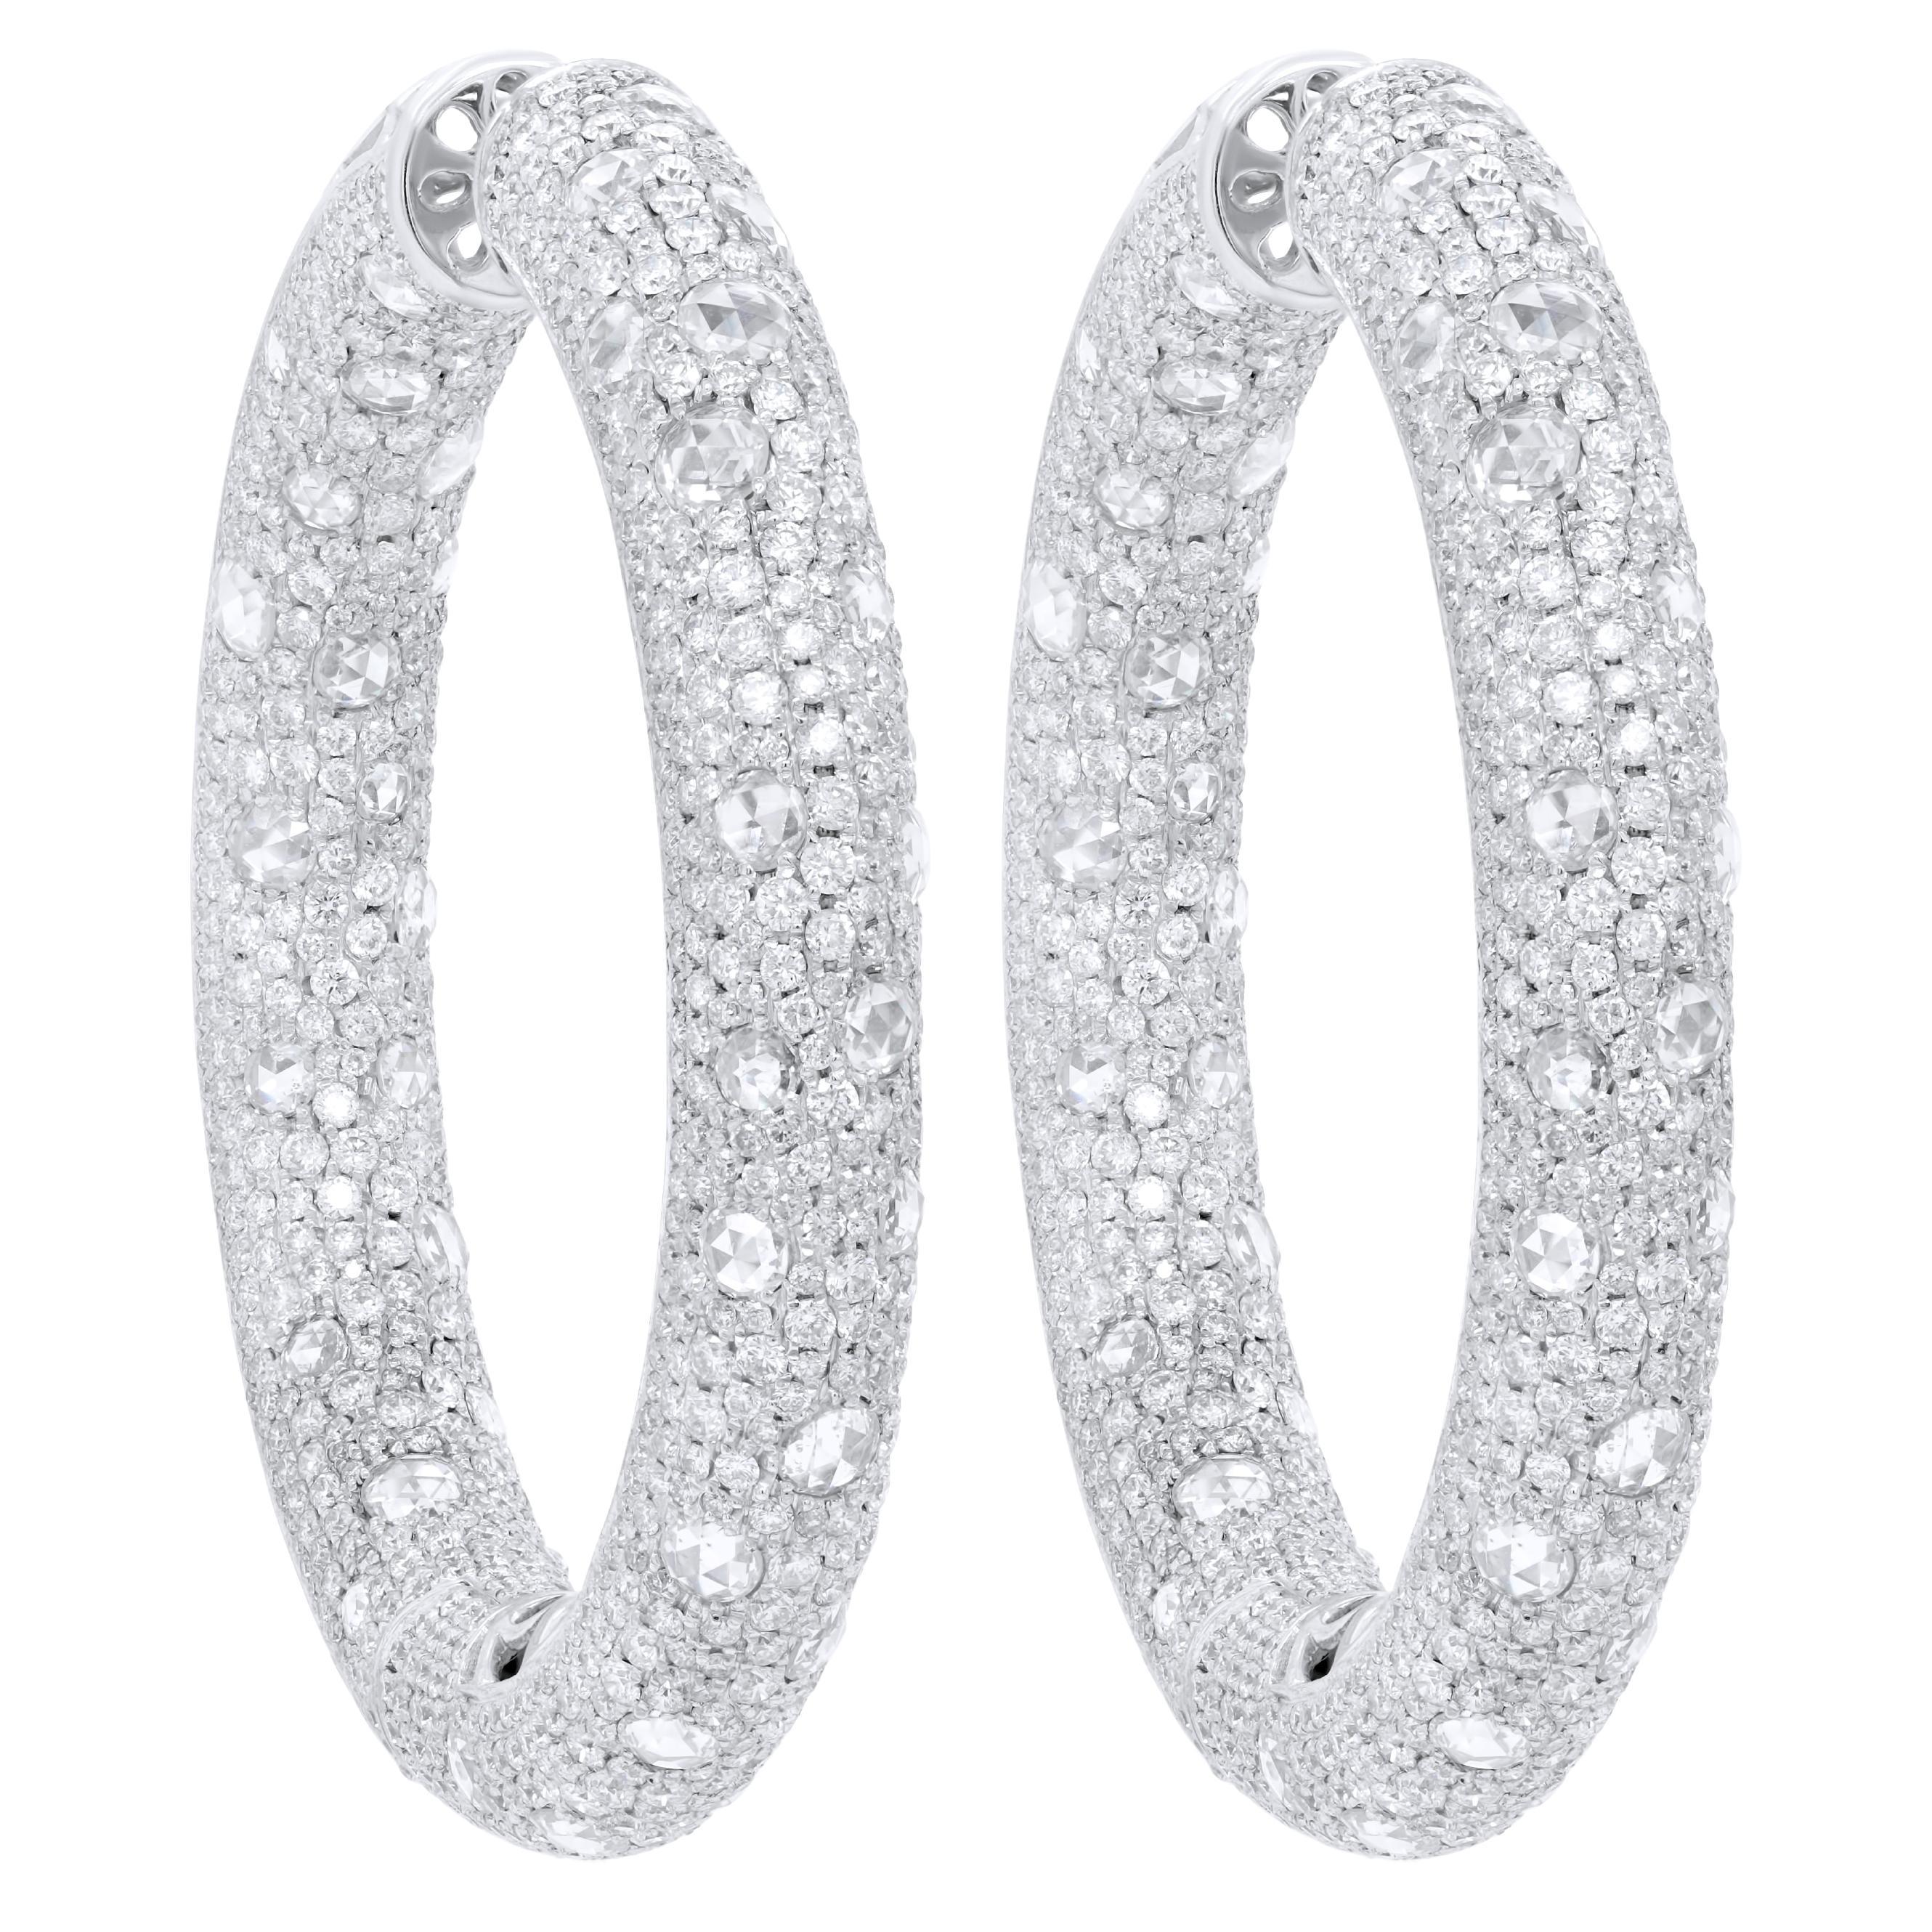 Diana M. 18 kt white gold, 2.25" inside-out hoop earrings adorned with 27.52cts 